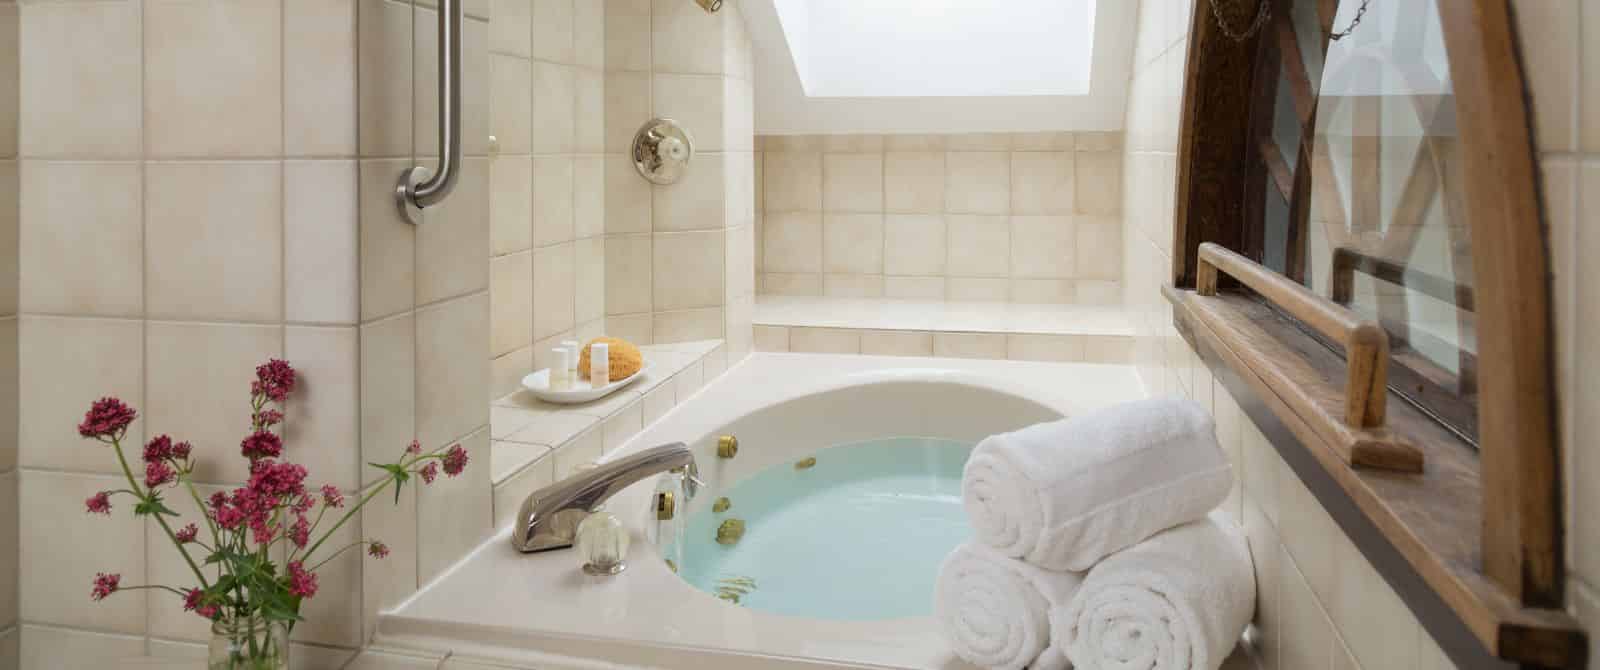 Large jetted tub full of water surrounded by light tan tile, three rolled white towels, and vase of pink flowers